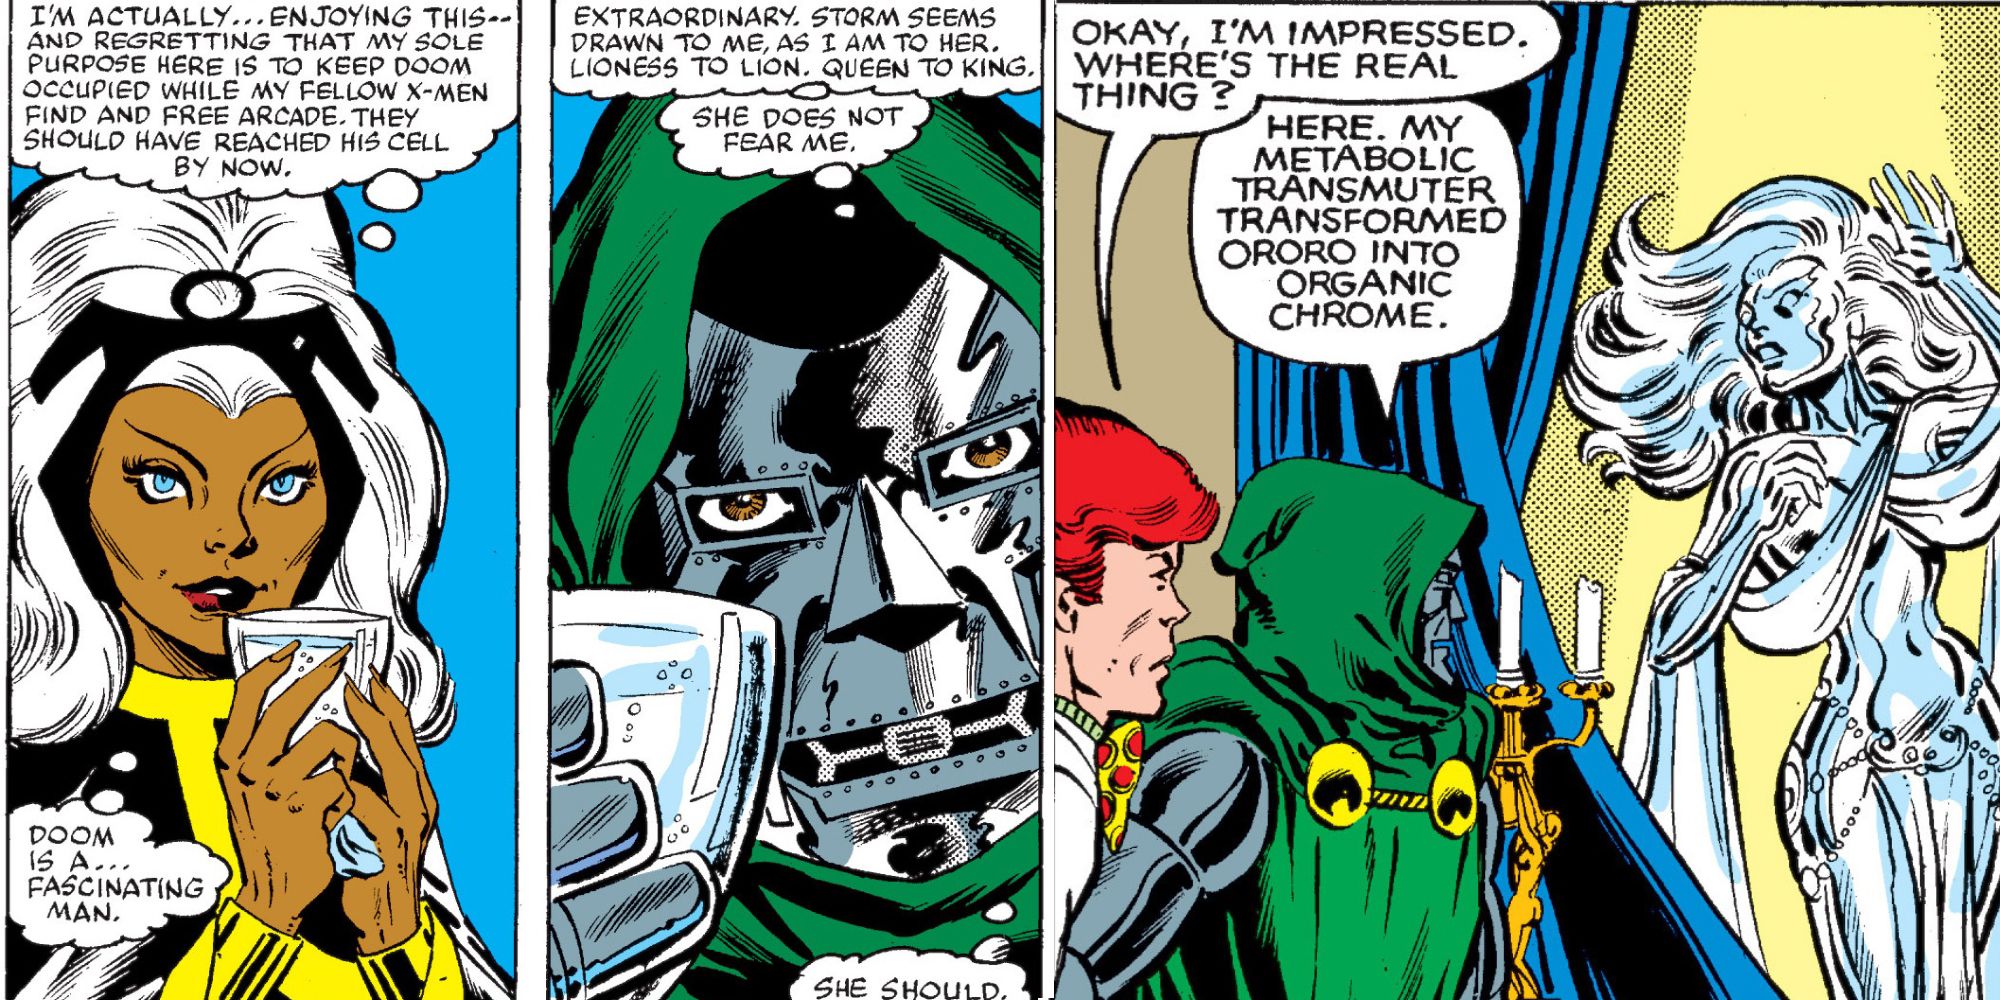 Storm shares a drink with Doctor Doom in X-Men comics.